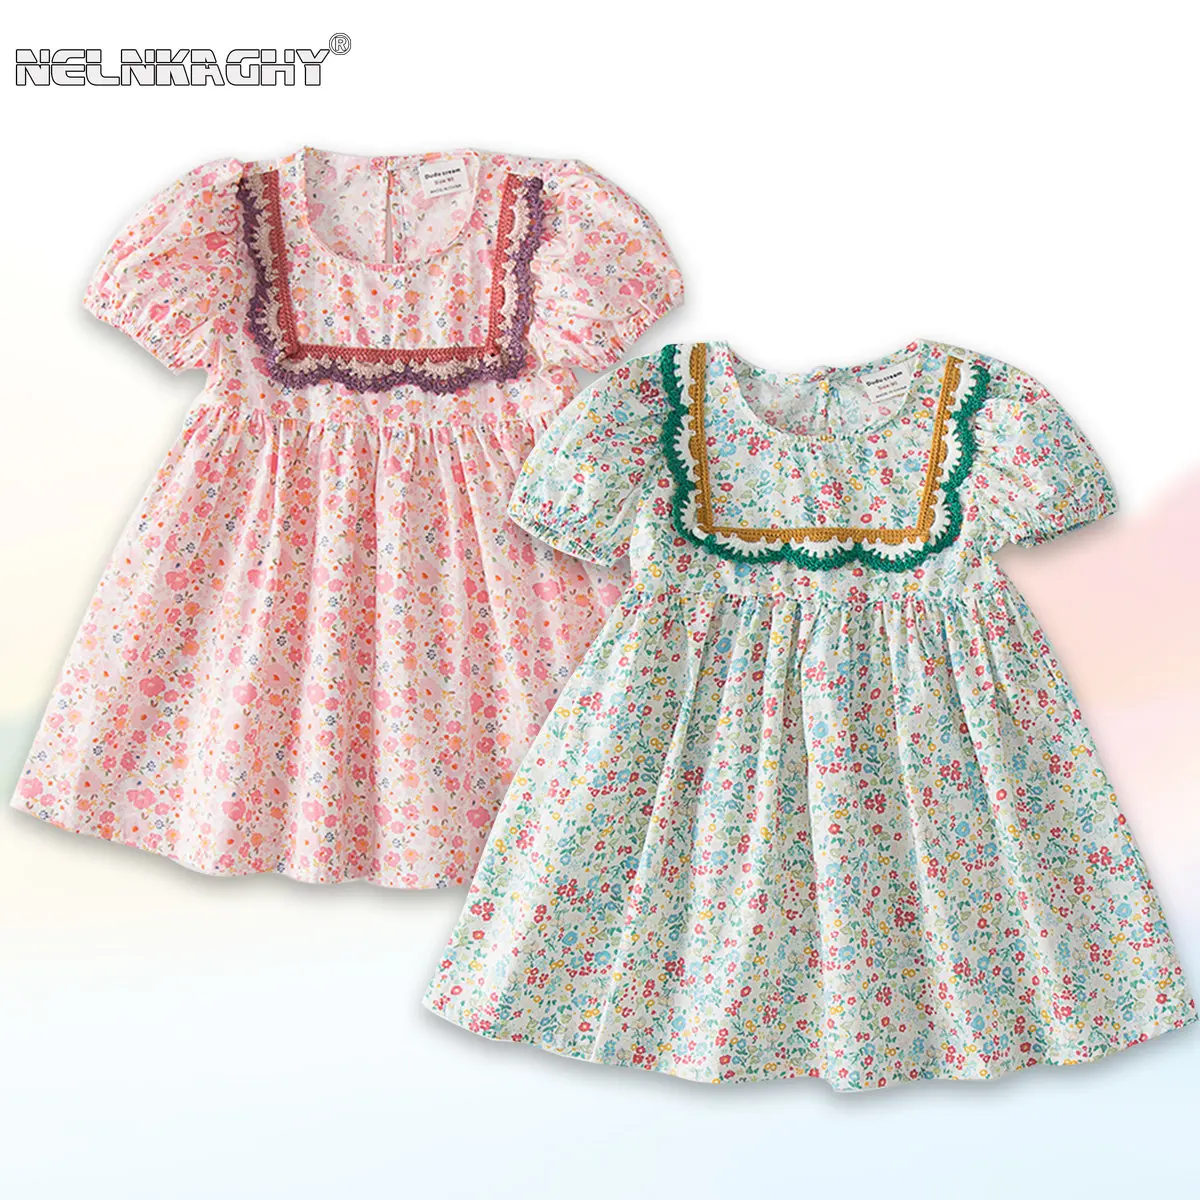 2023 New In Summer Kids Baby Girls Puff Sleeve Floral Lace Knee-length Dresses Children Princess Cute Clothing Cotton Dress